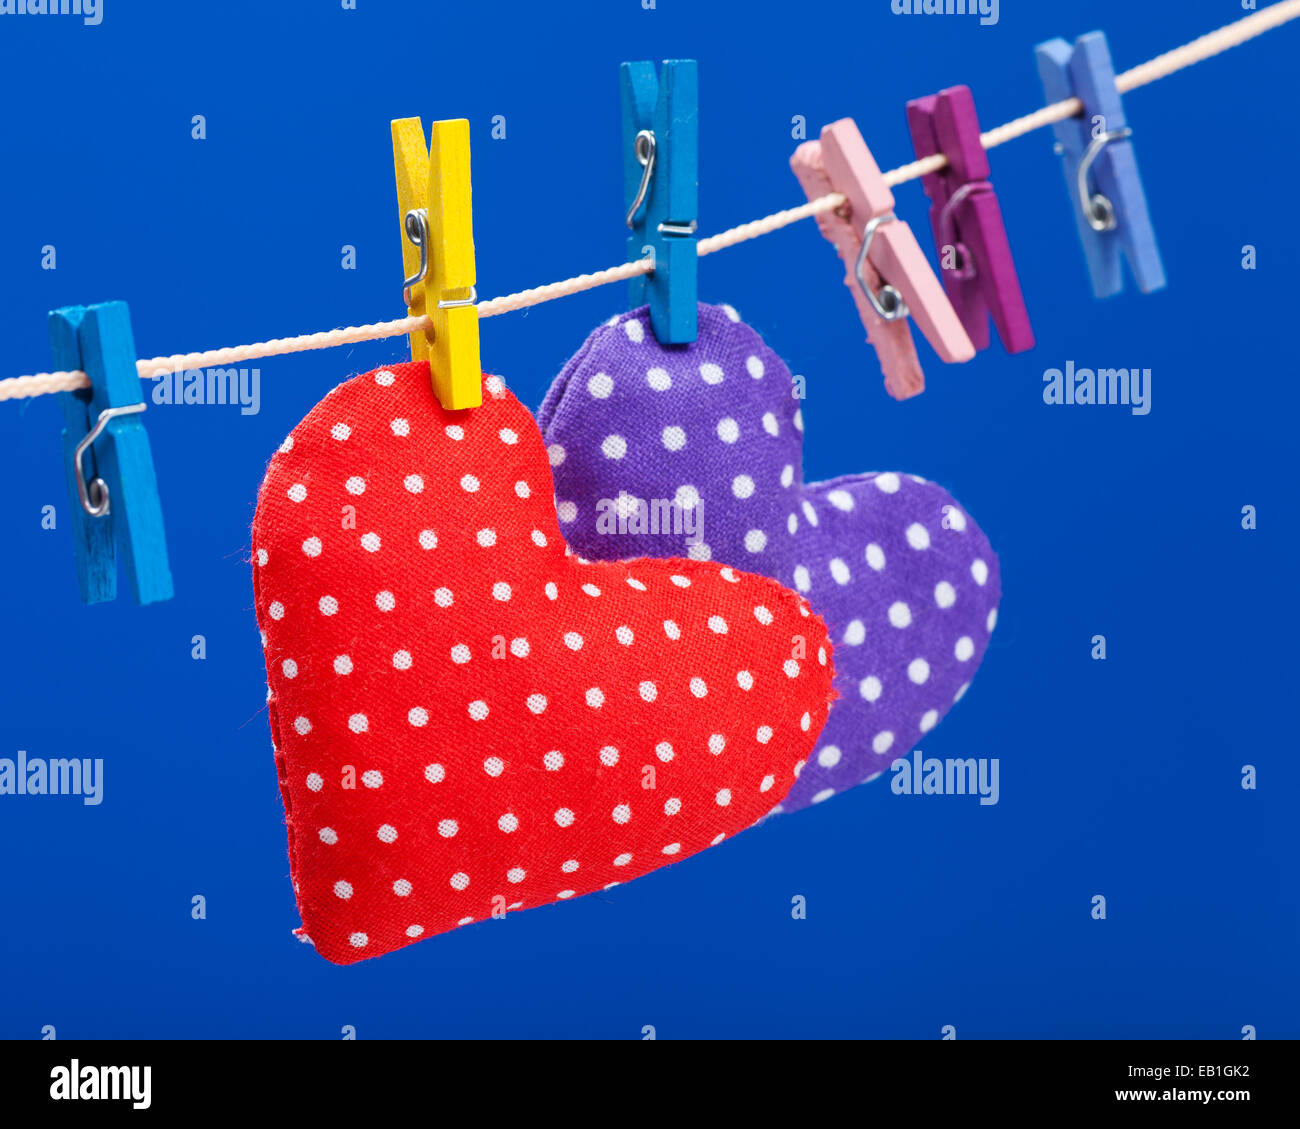 two hearts hanging on a clothesline with clothespins, focus on red. Blue background Stock Photo